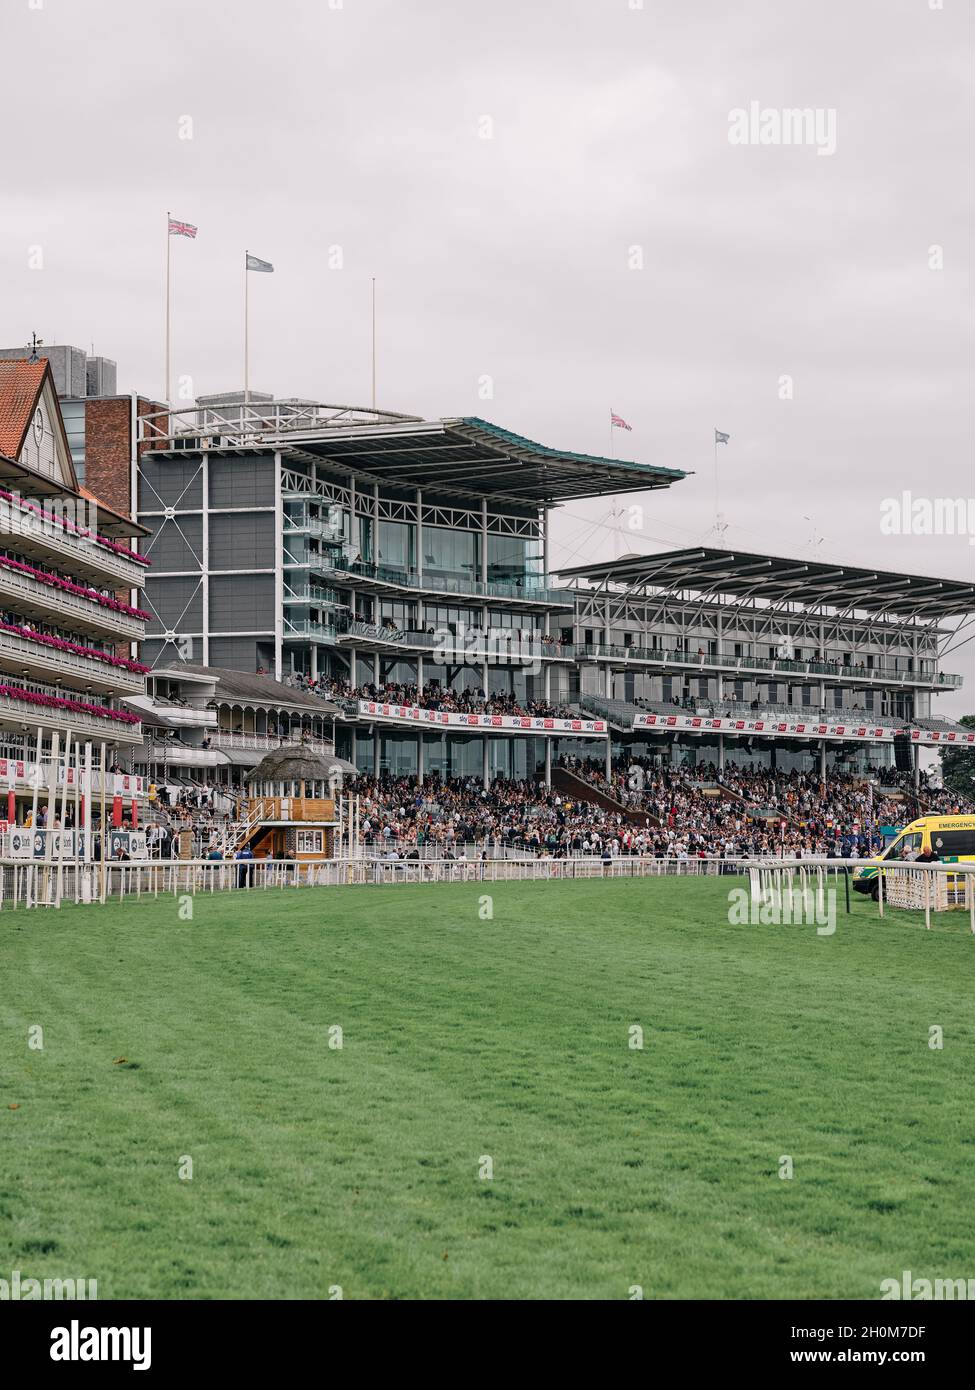 The Ebor and Knavesmmire county stands and racecourse at York Racecourse Yorkshire England UK summer 2021 Stock Photo